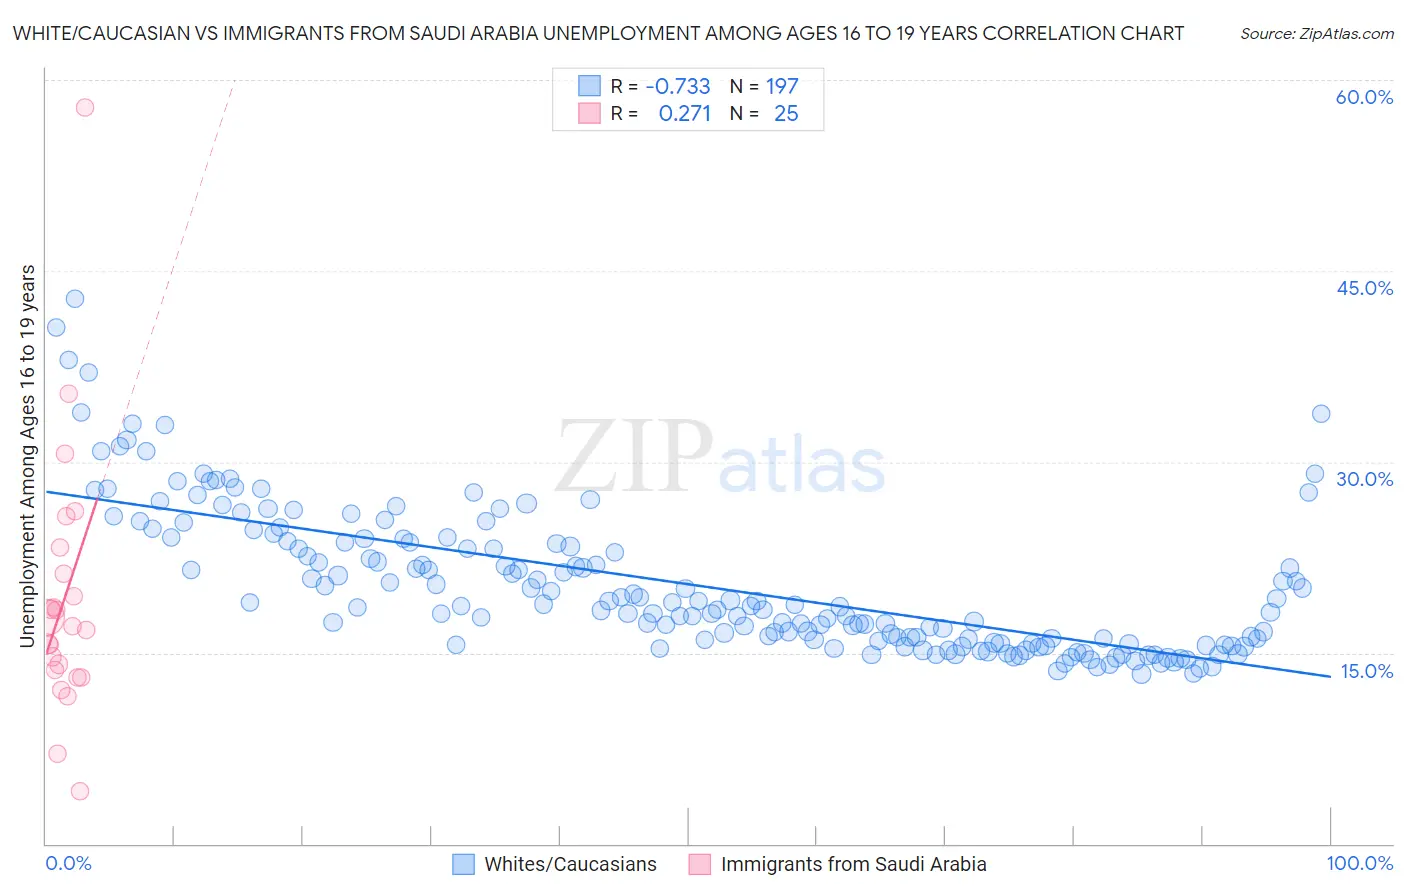 White/Caucasian vs Immigrants from Saudi Arabia Unemployment Among Ages 16 to 19 years